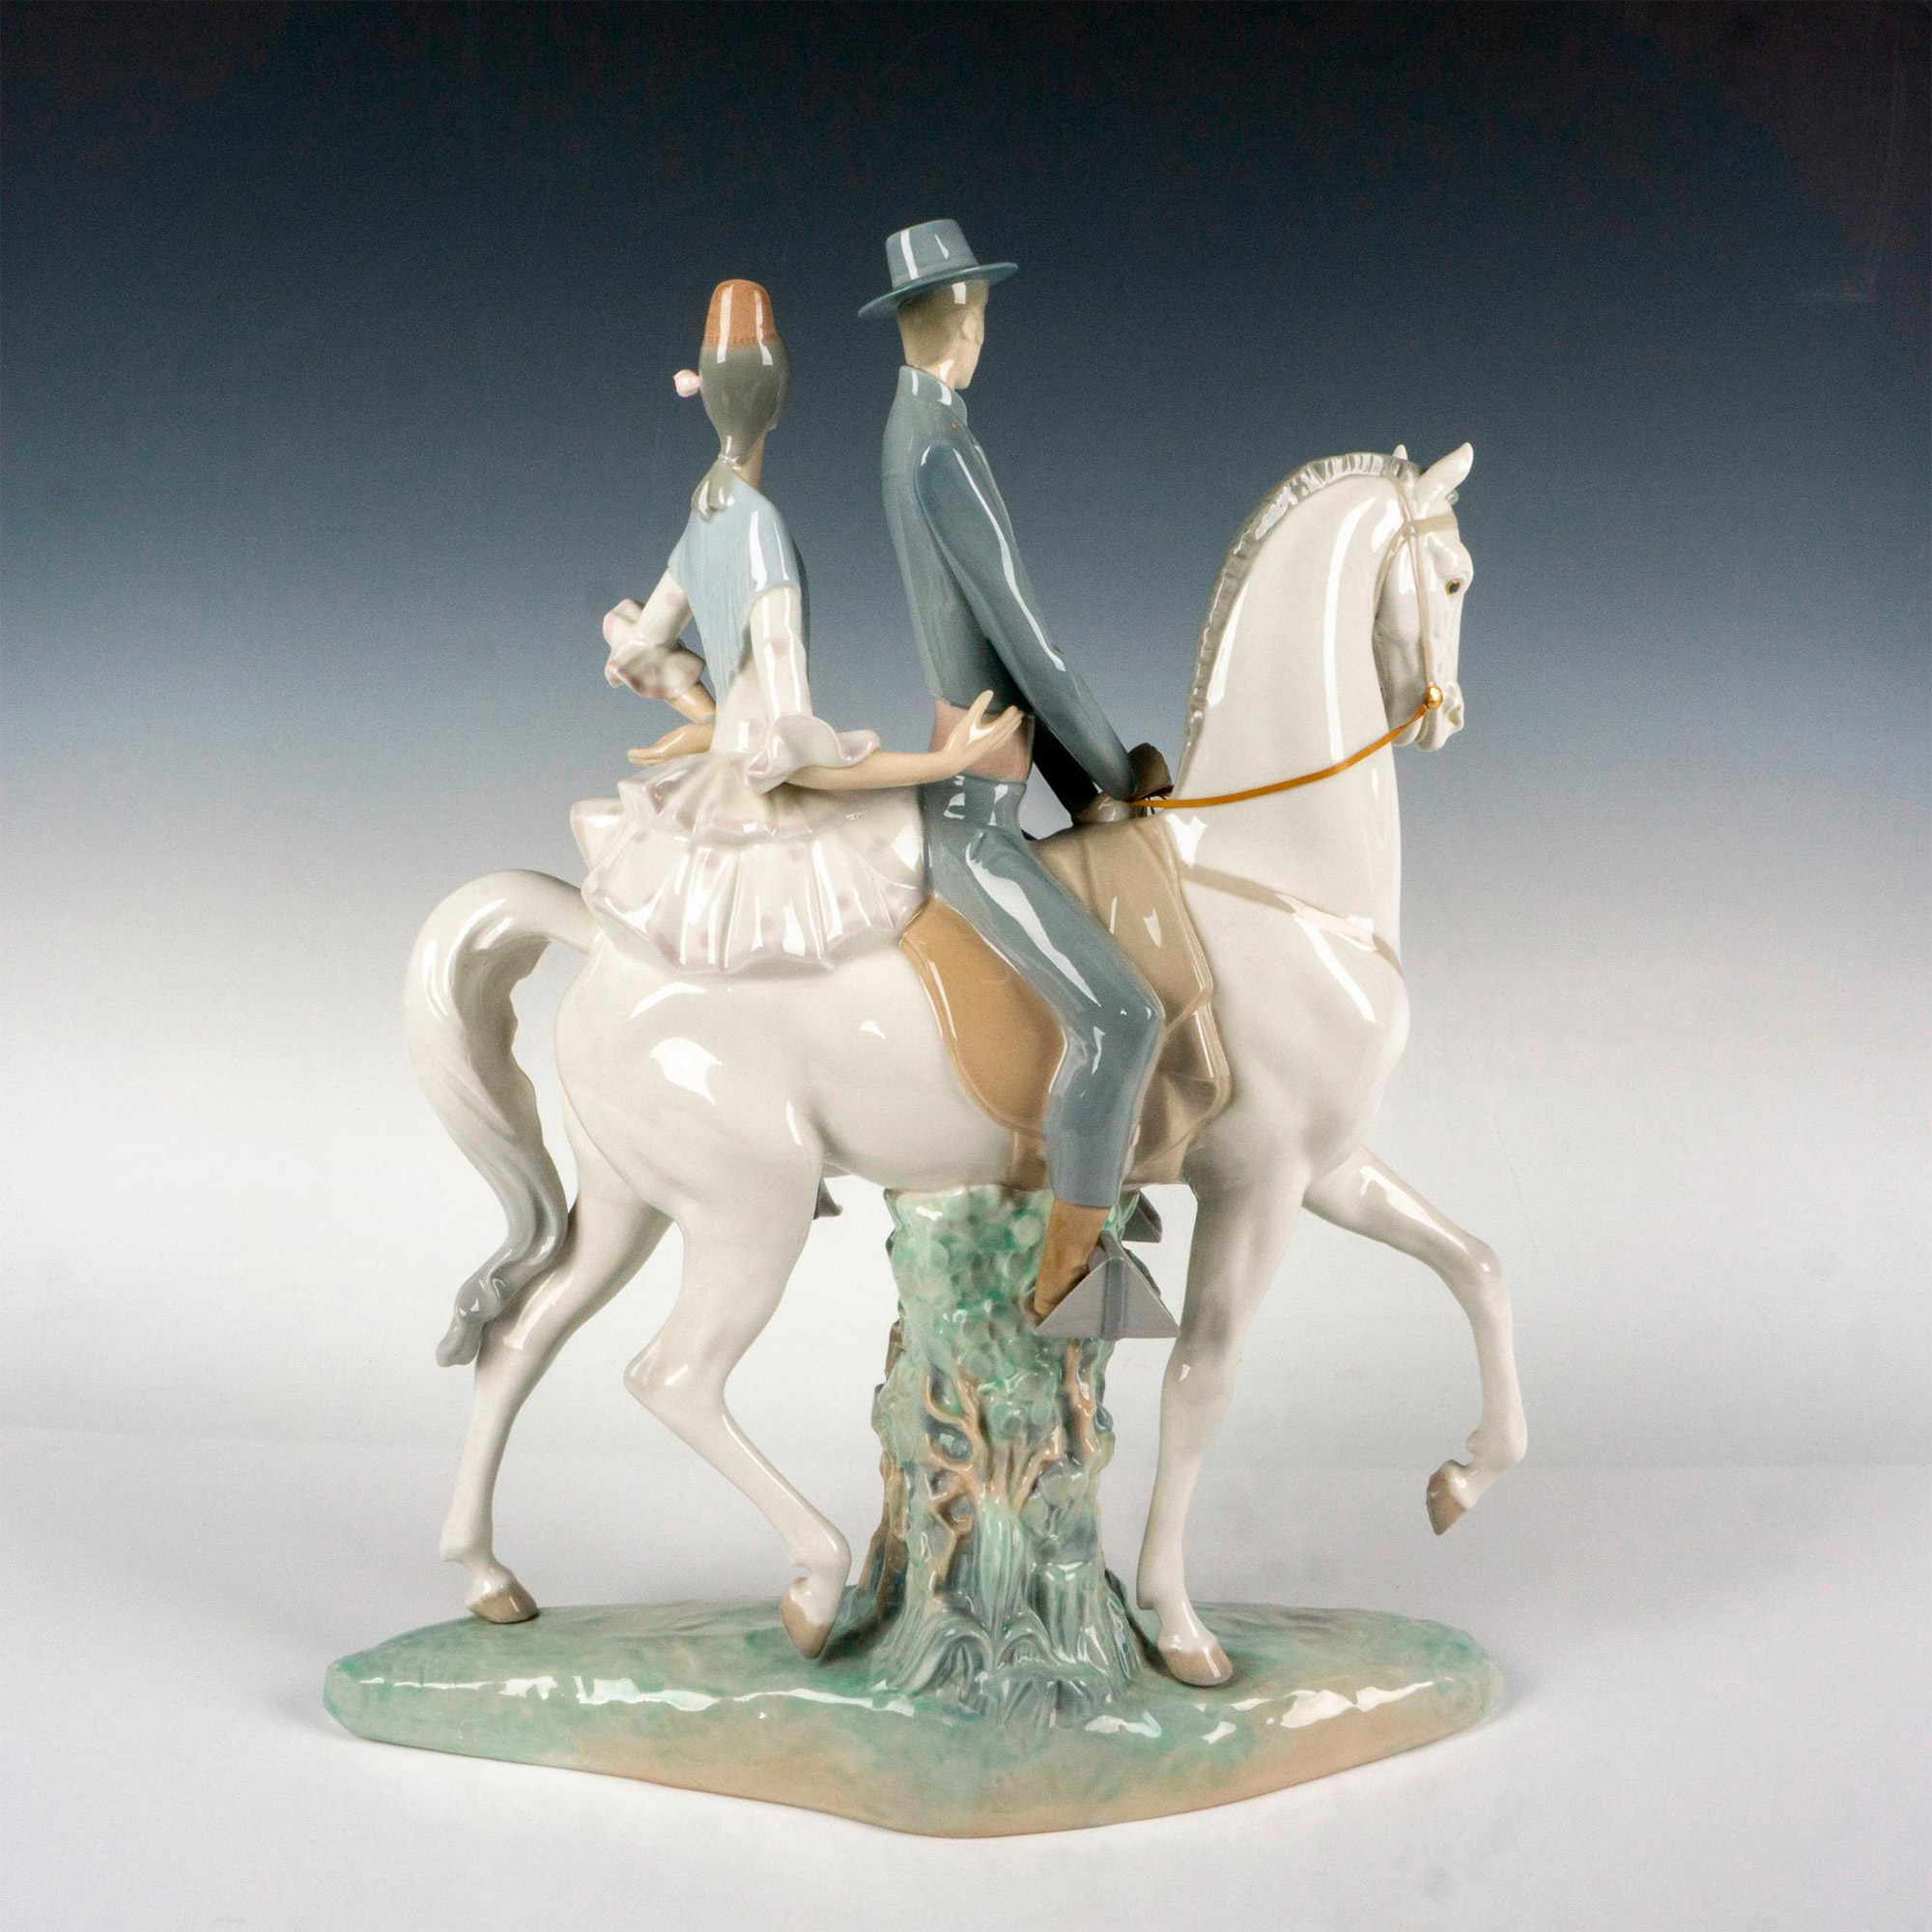 Andalucians Group 1004647 - Lladro Porcelain Figurine - Image 3 of 5